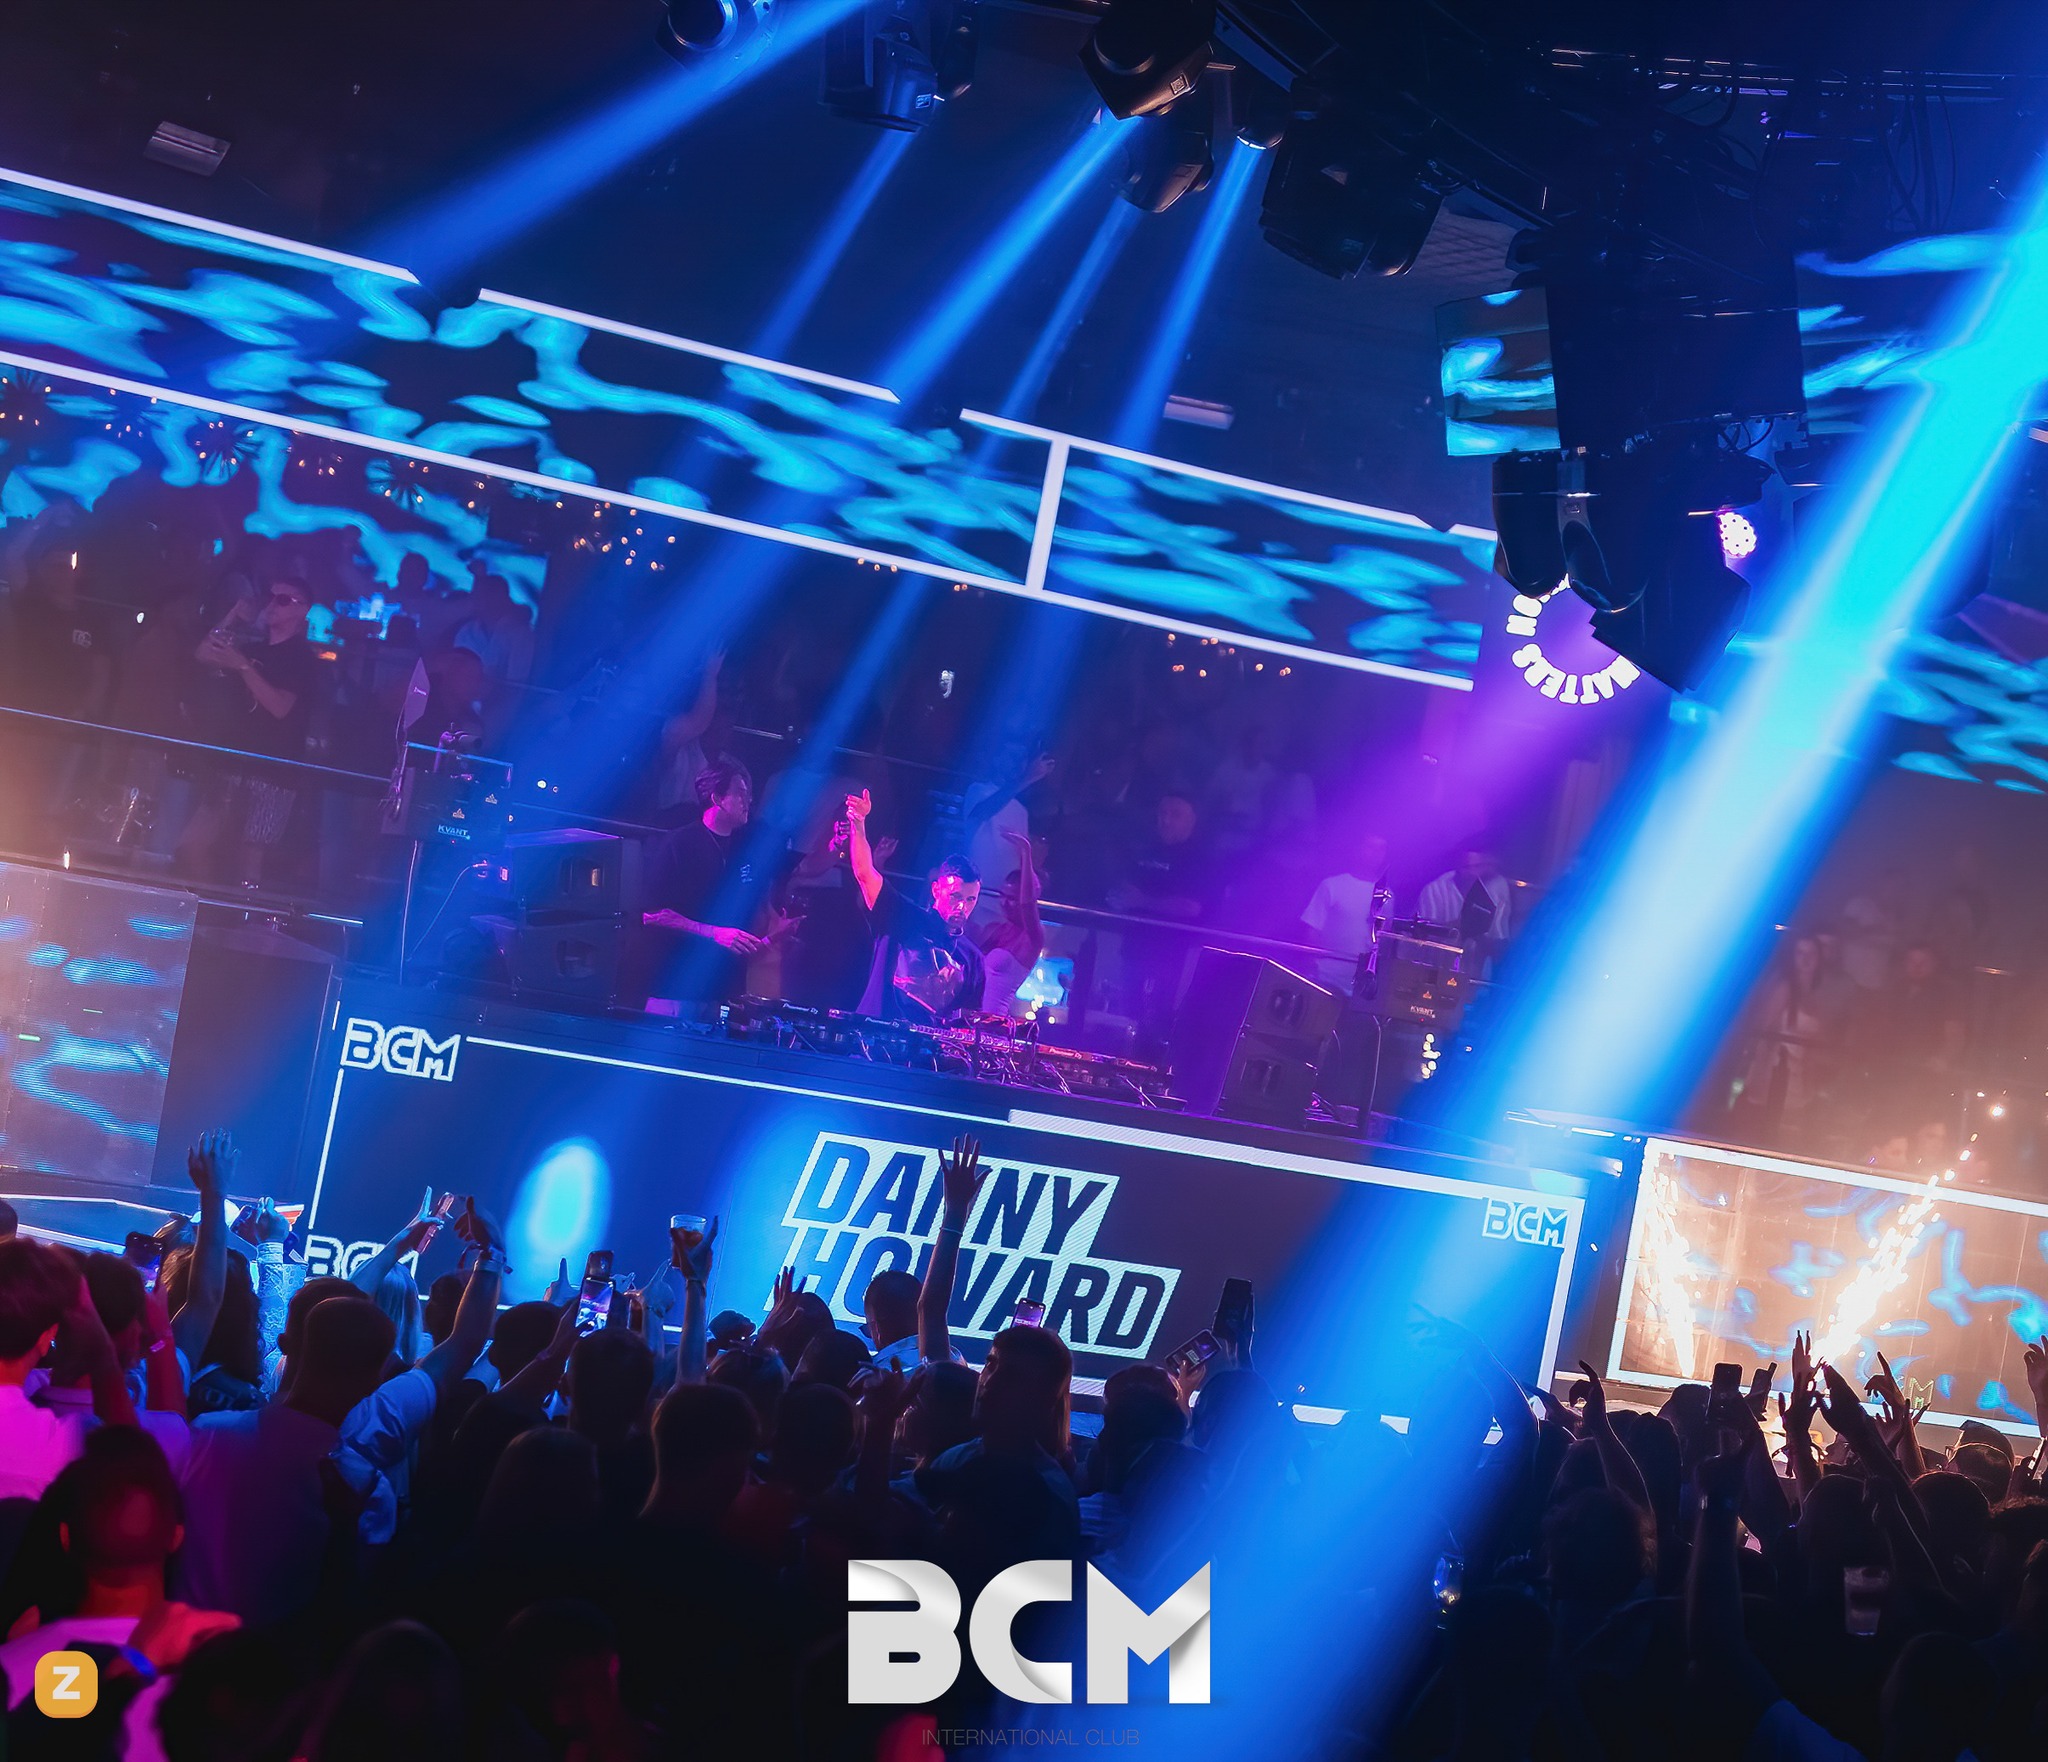 bcm-magaluf-parties-tickets-events22